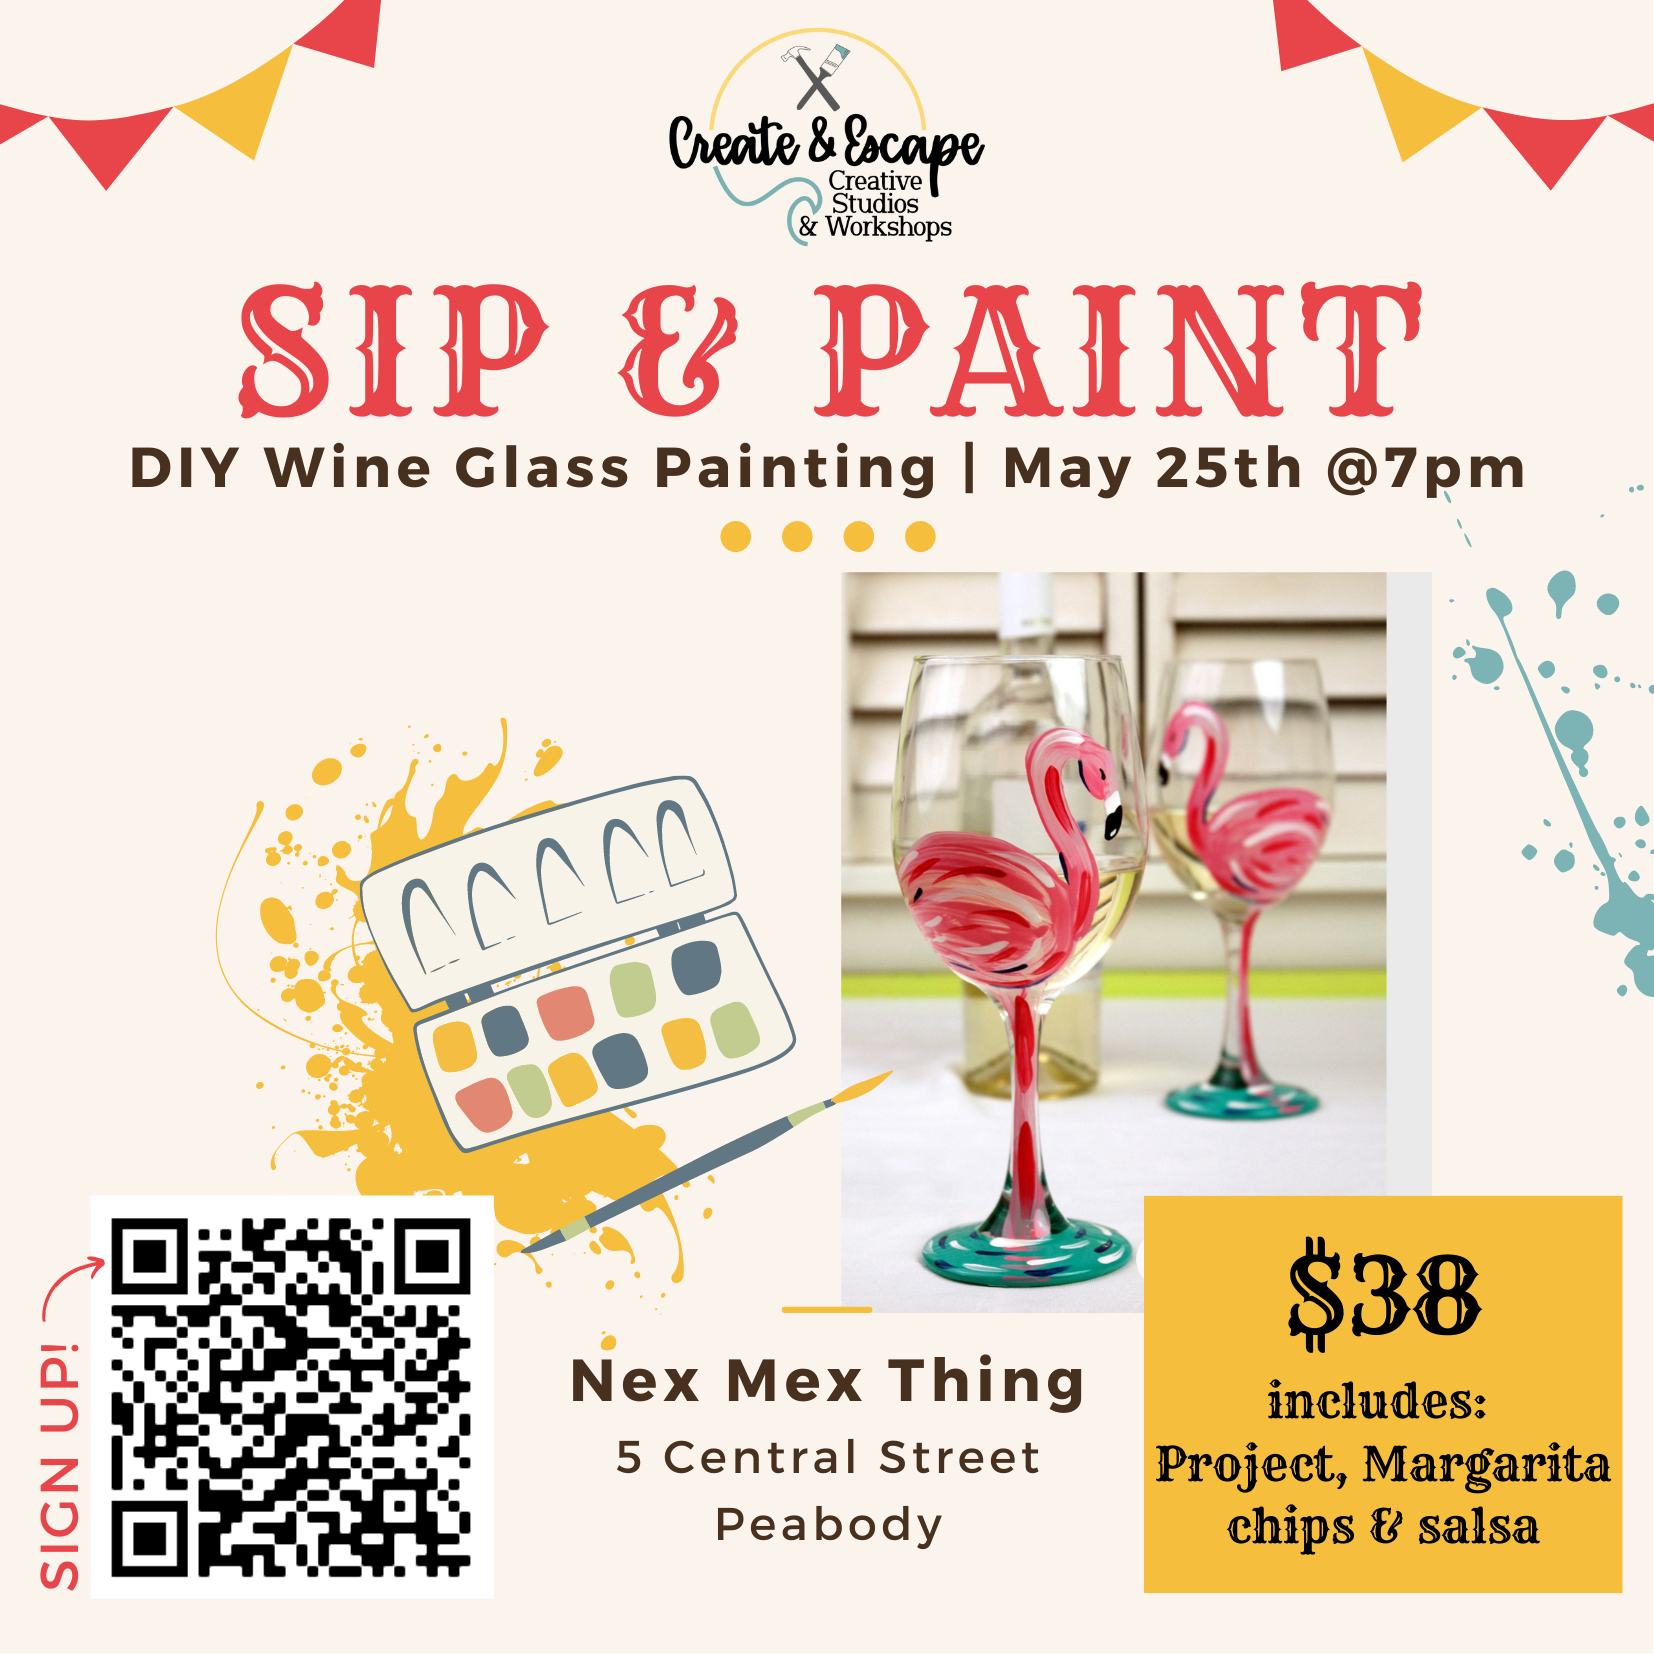 a flyer for a sip and paint event.